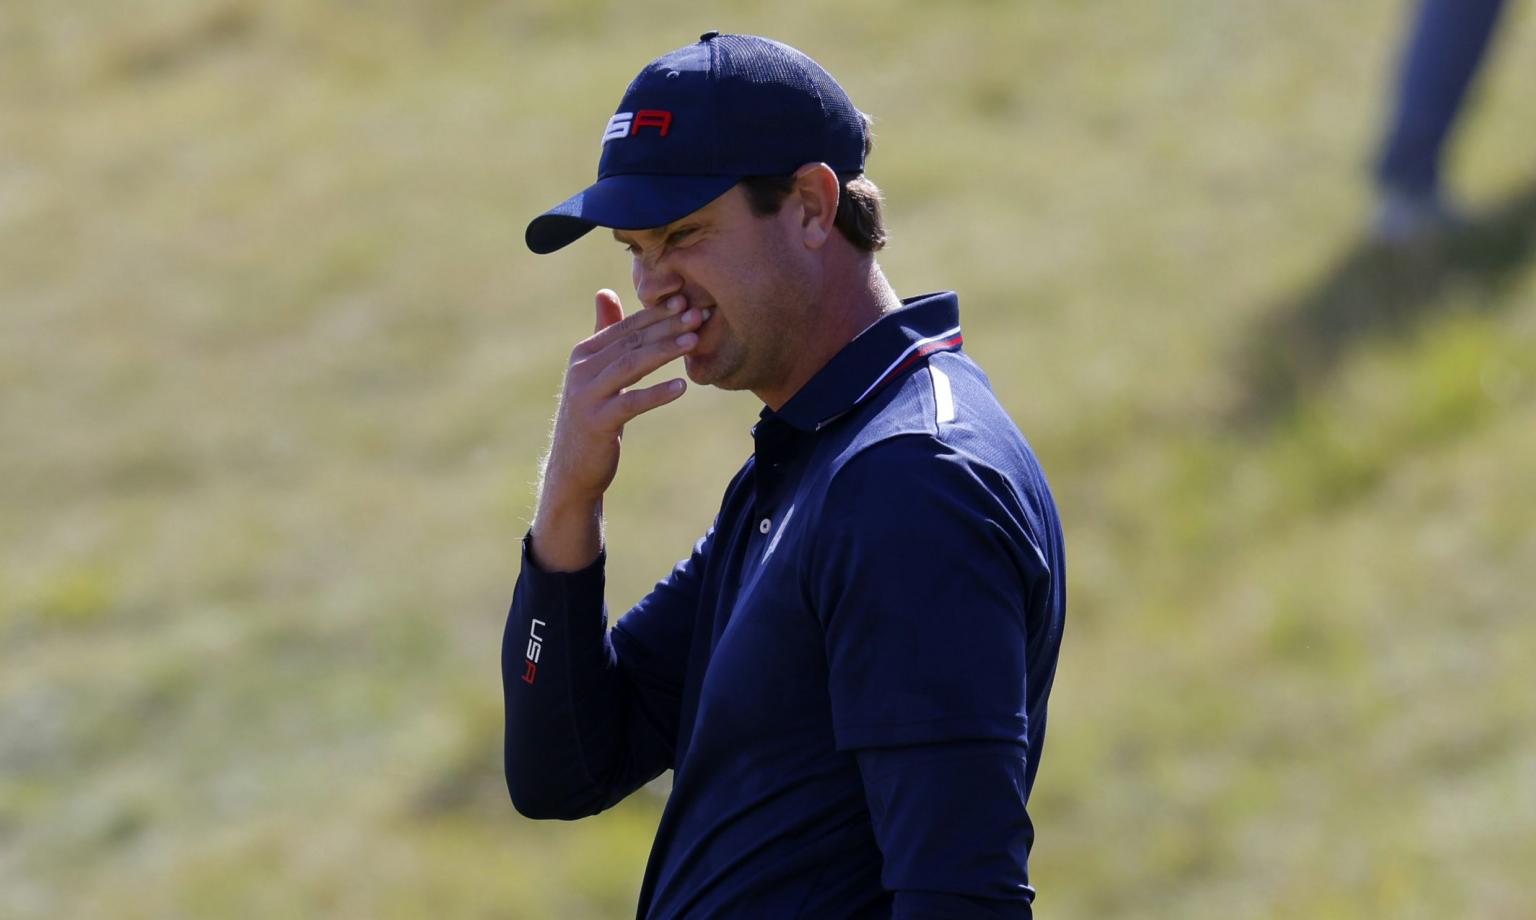 Here's how a PUTTER GRIP caused Ryder Cup CONTROVERSY at Whistling